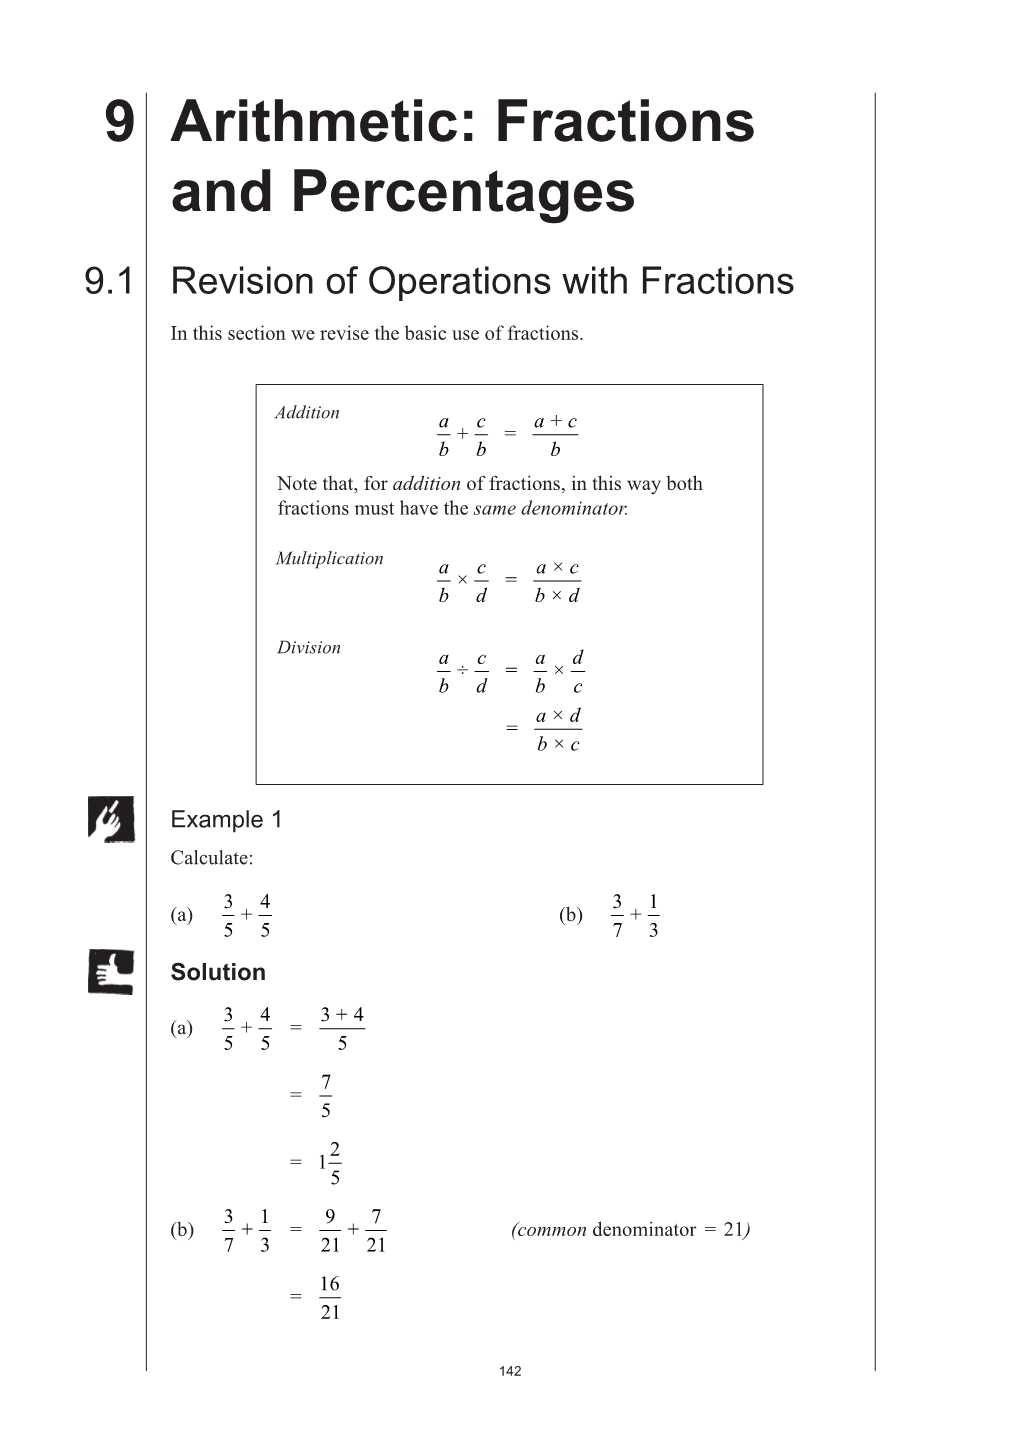 9 Arithmetic: Fractions and Percentages